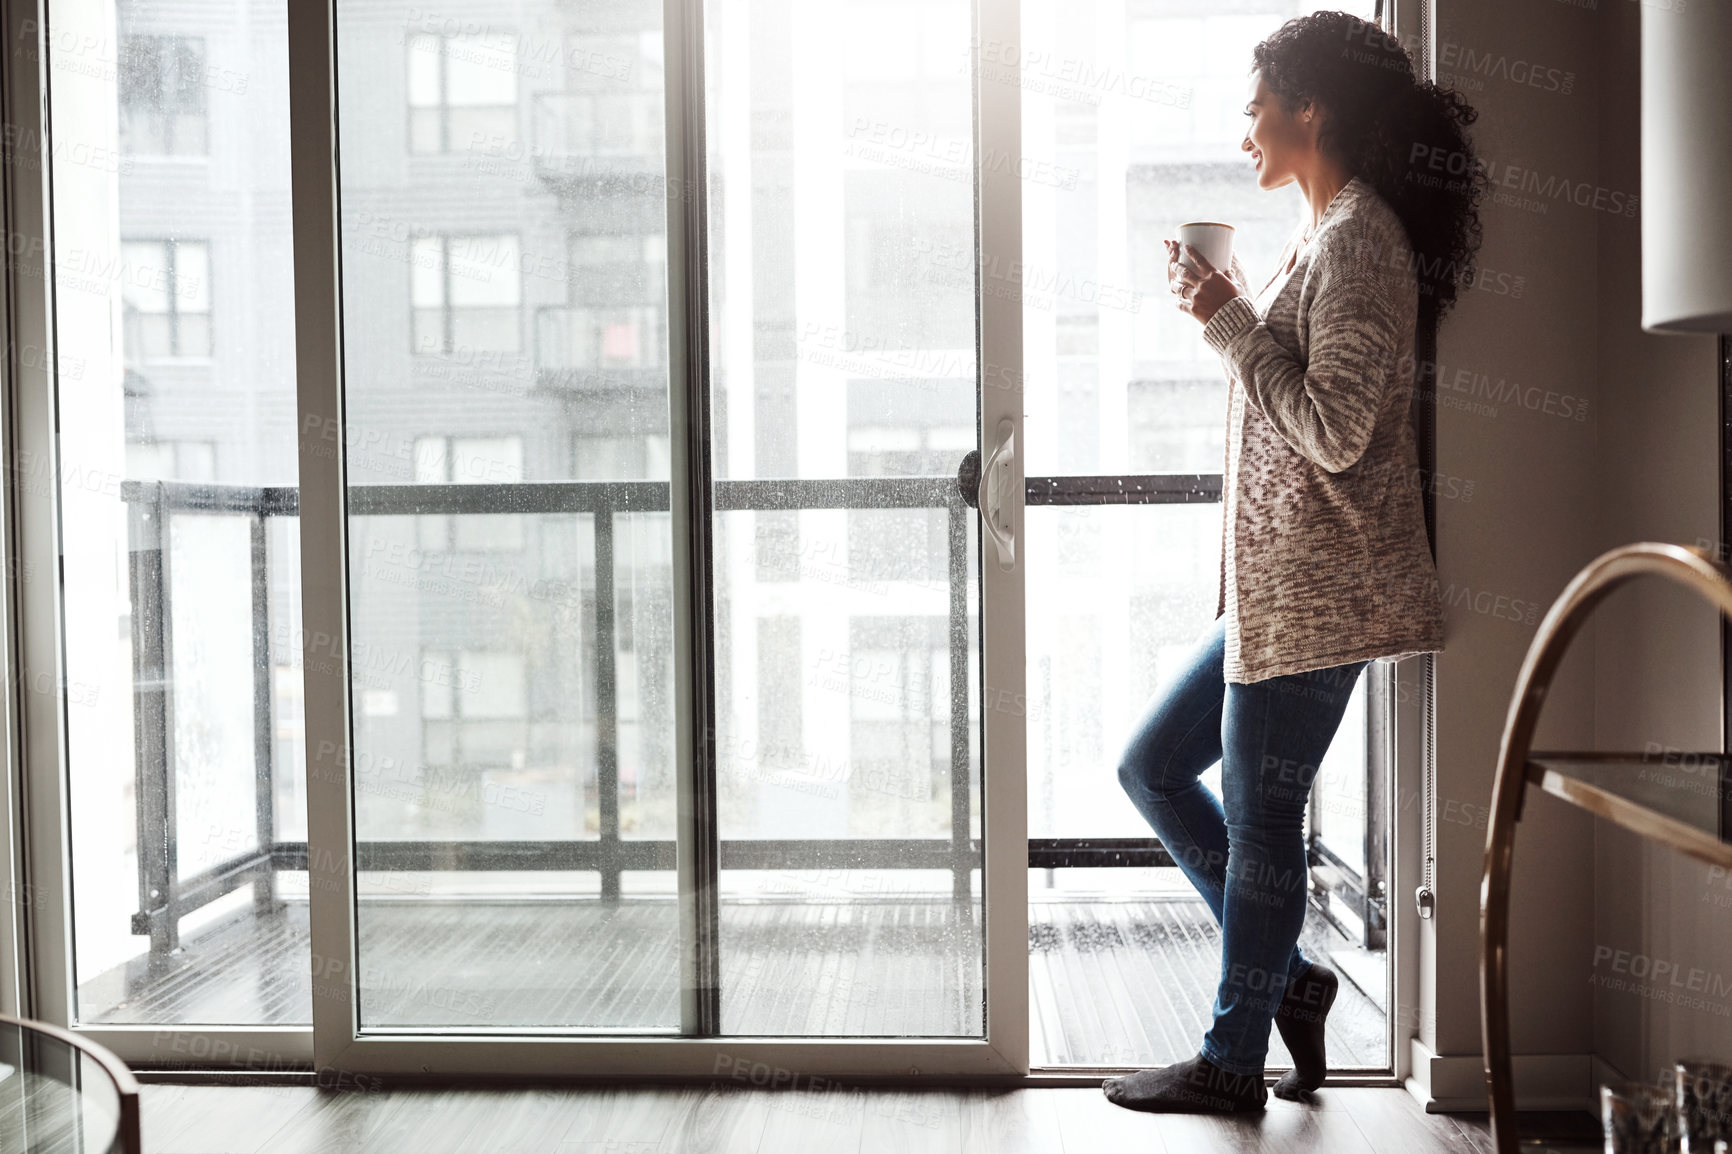 Buy stock photo Shot of a cheerful young woman drinking coffee while looking through a window inside at home during the day